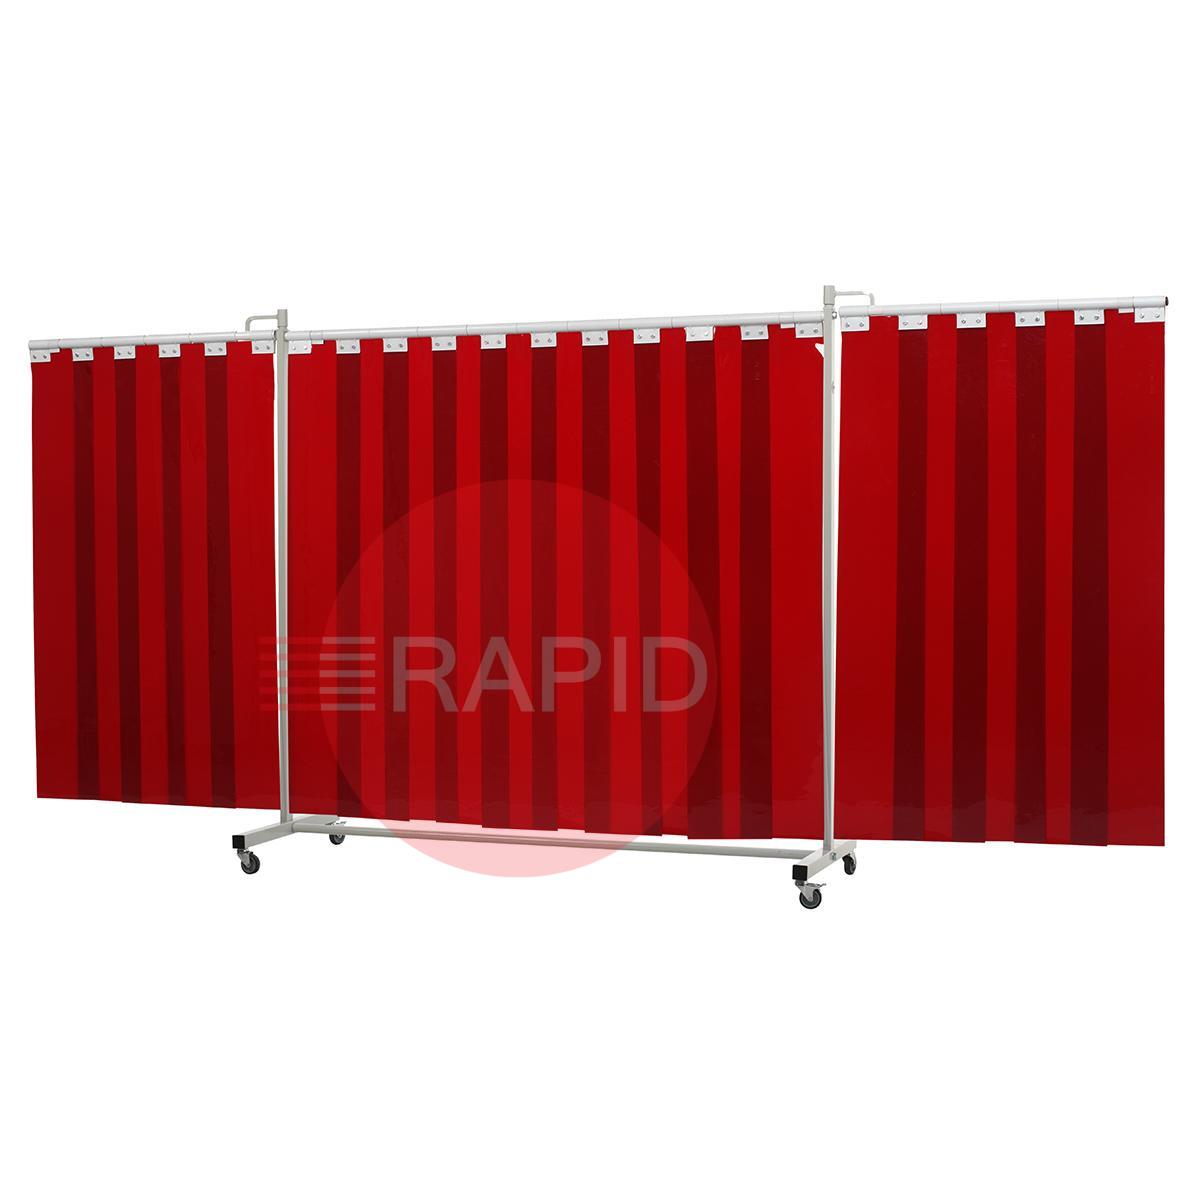 36.31.75  CEPRO Robusto XL Triptych Welding Screen with Orange-CE Strips - 4.4m Wide x 2.1m High, Approved EN 25980